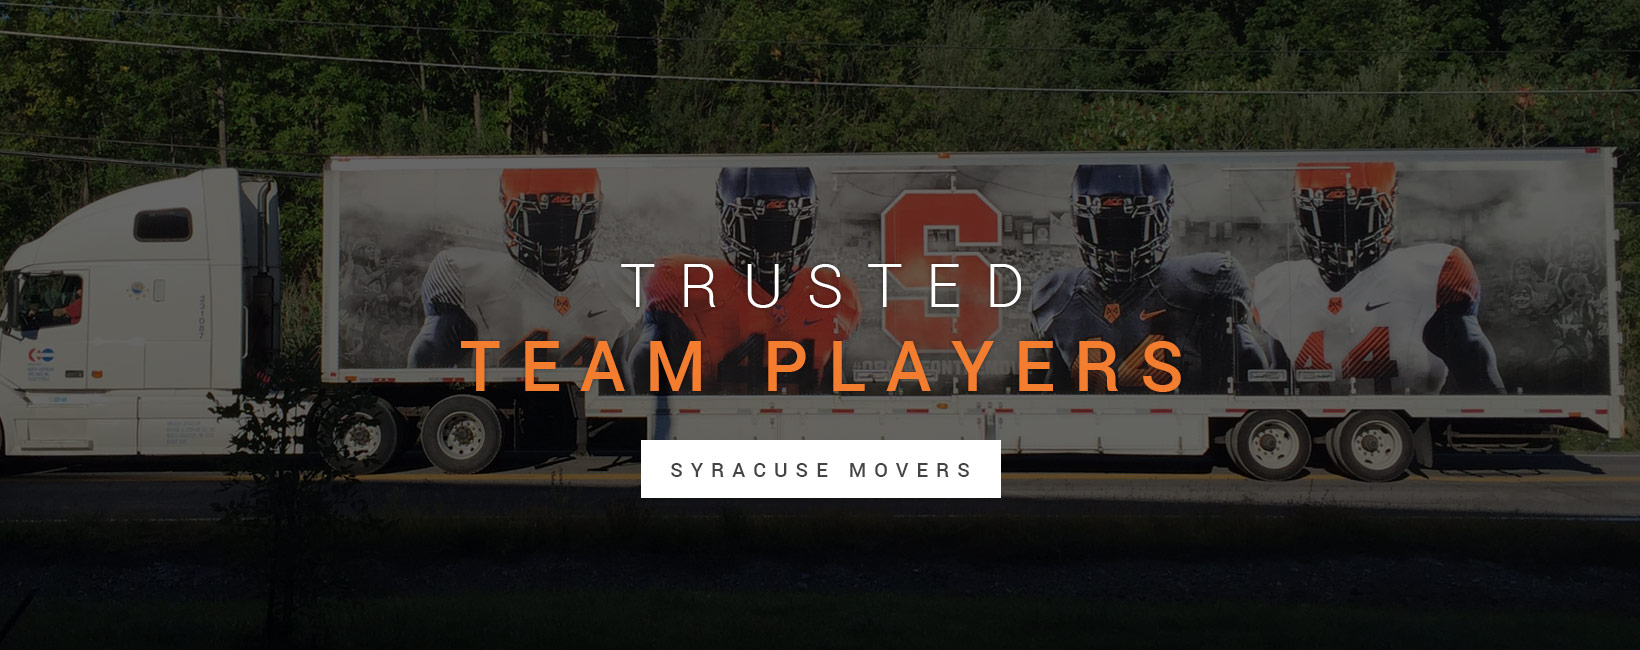 Trusted Team Players - Syracuse University Movers